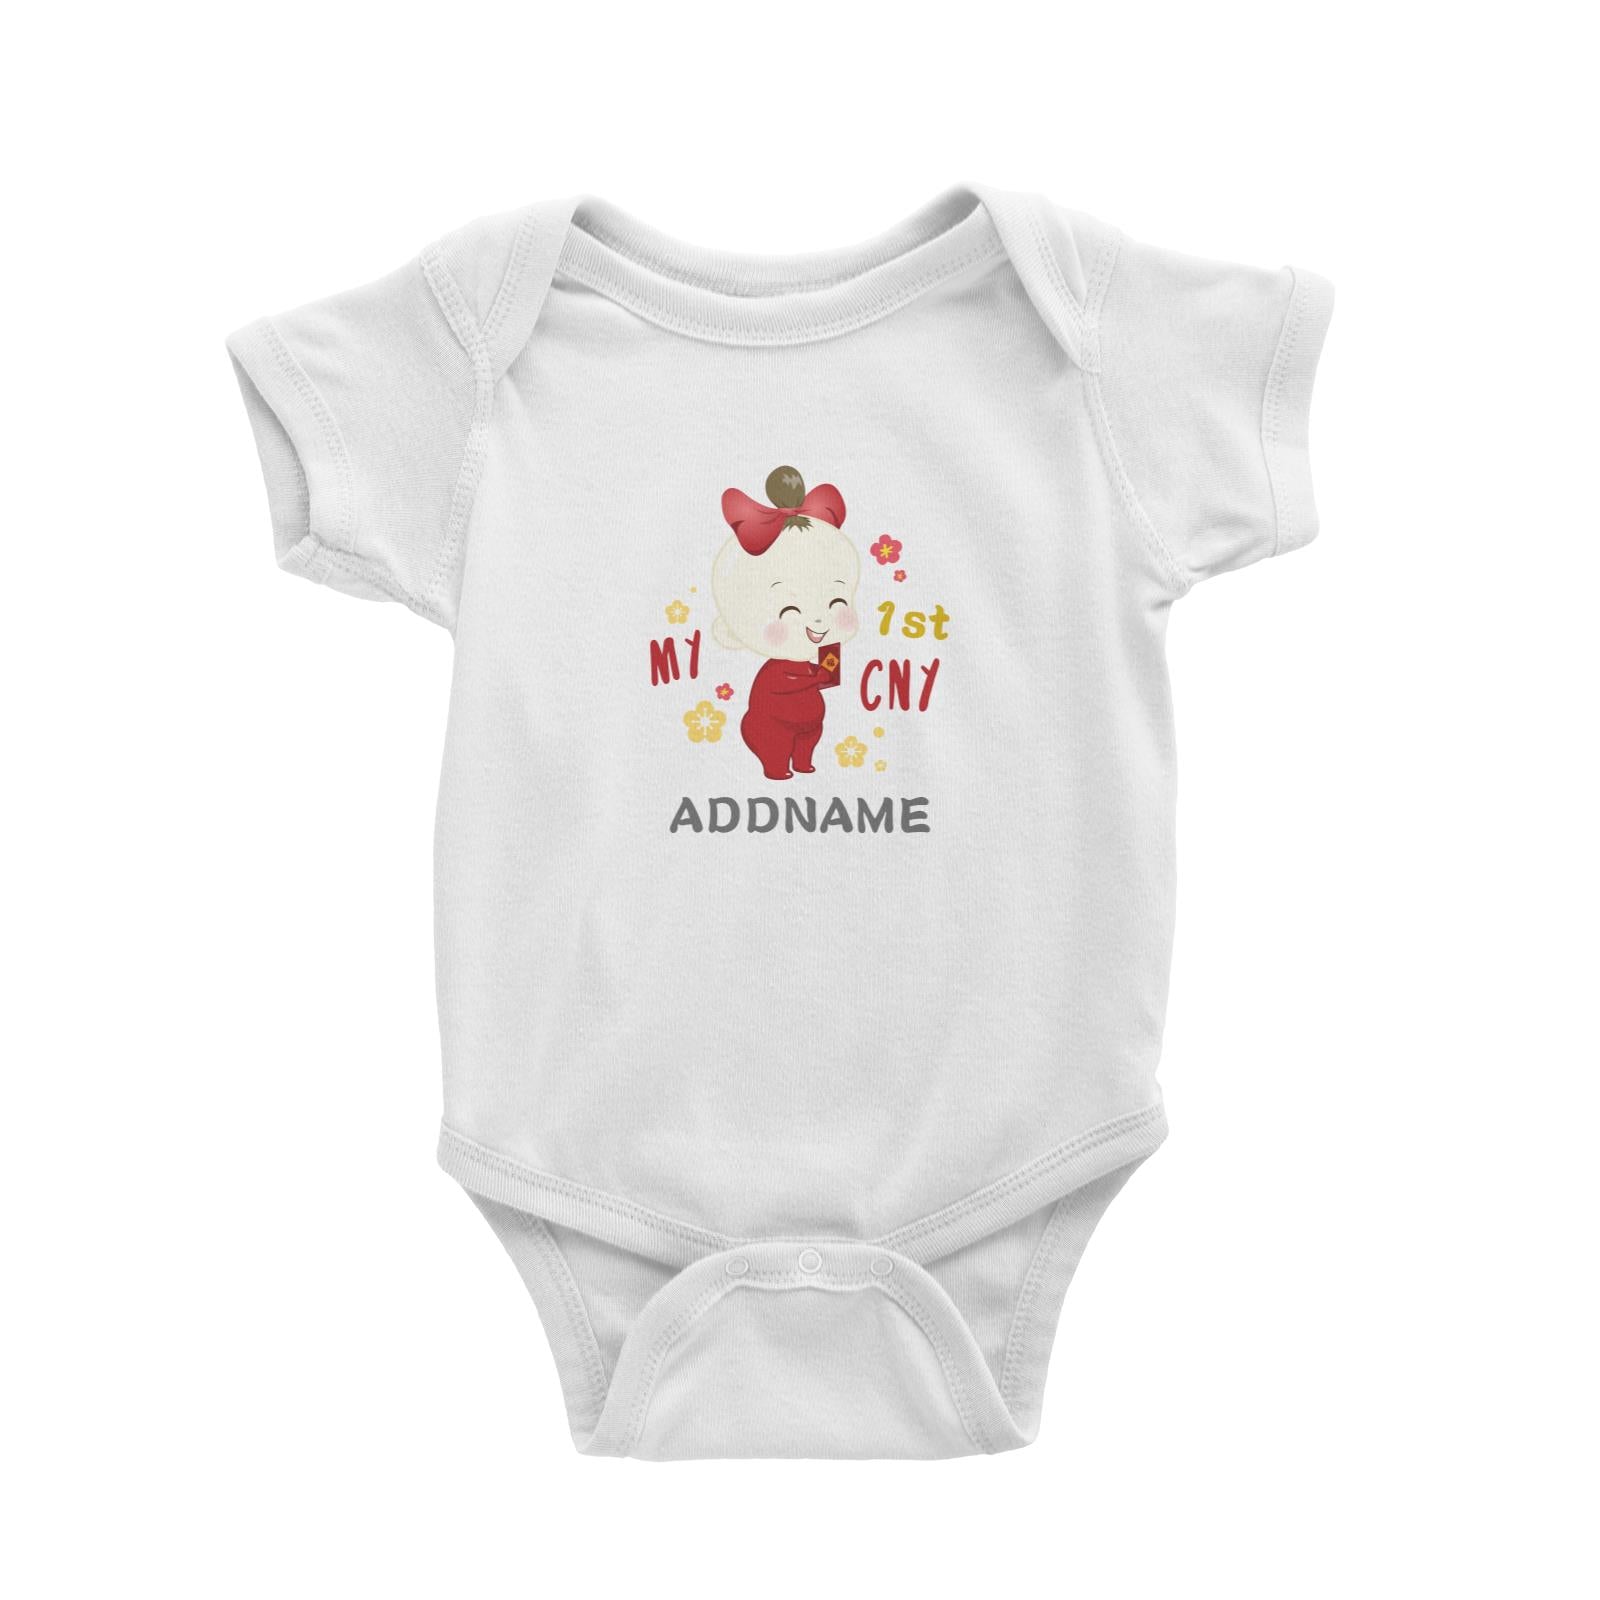 Chinese New Year Family My 1st CNY Baby Girl Addname Baby Romper